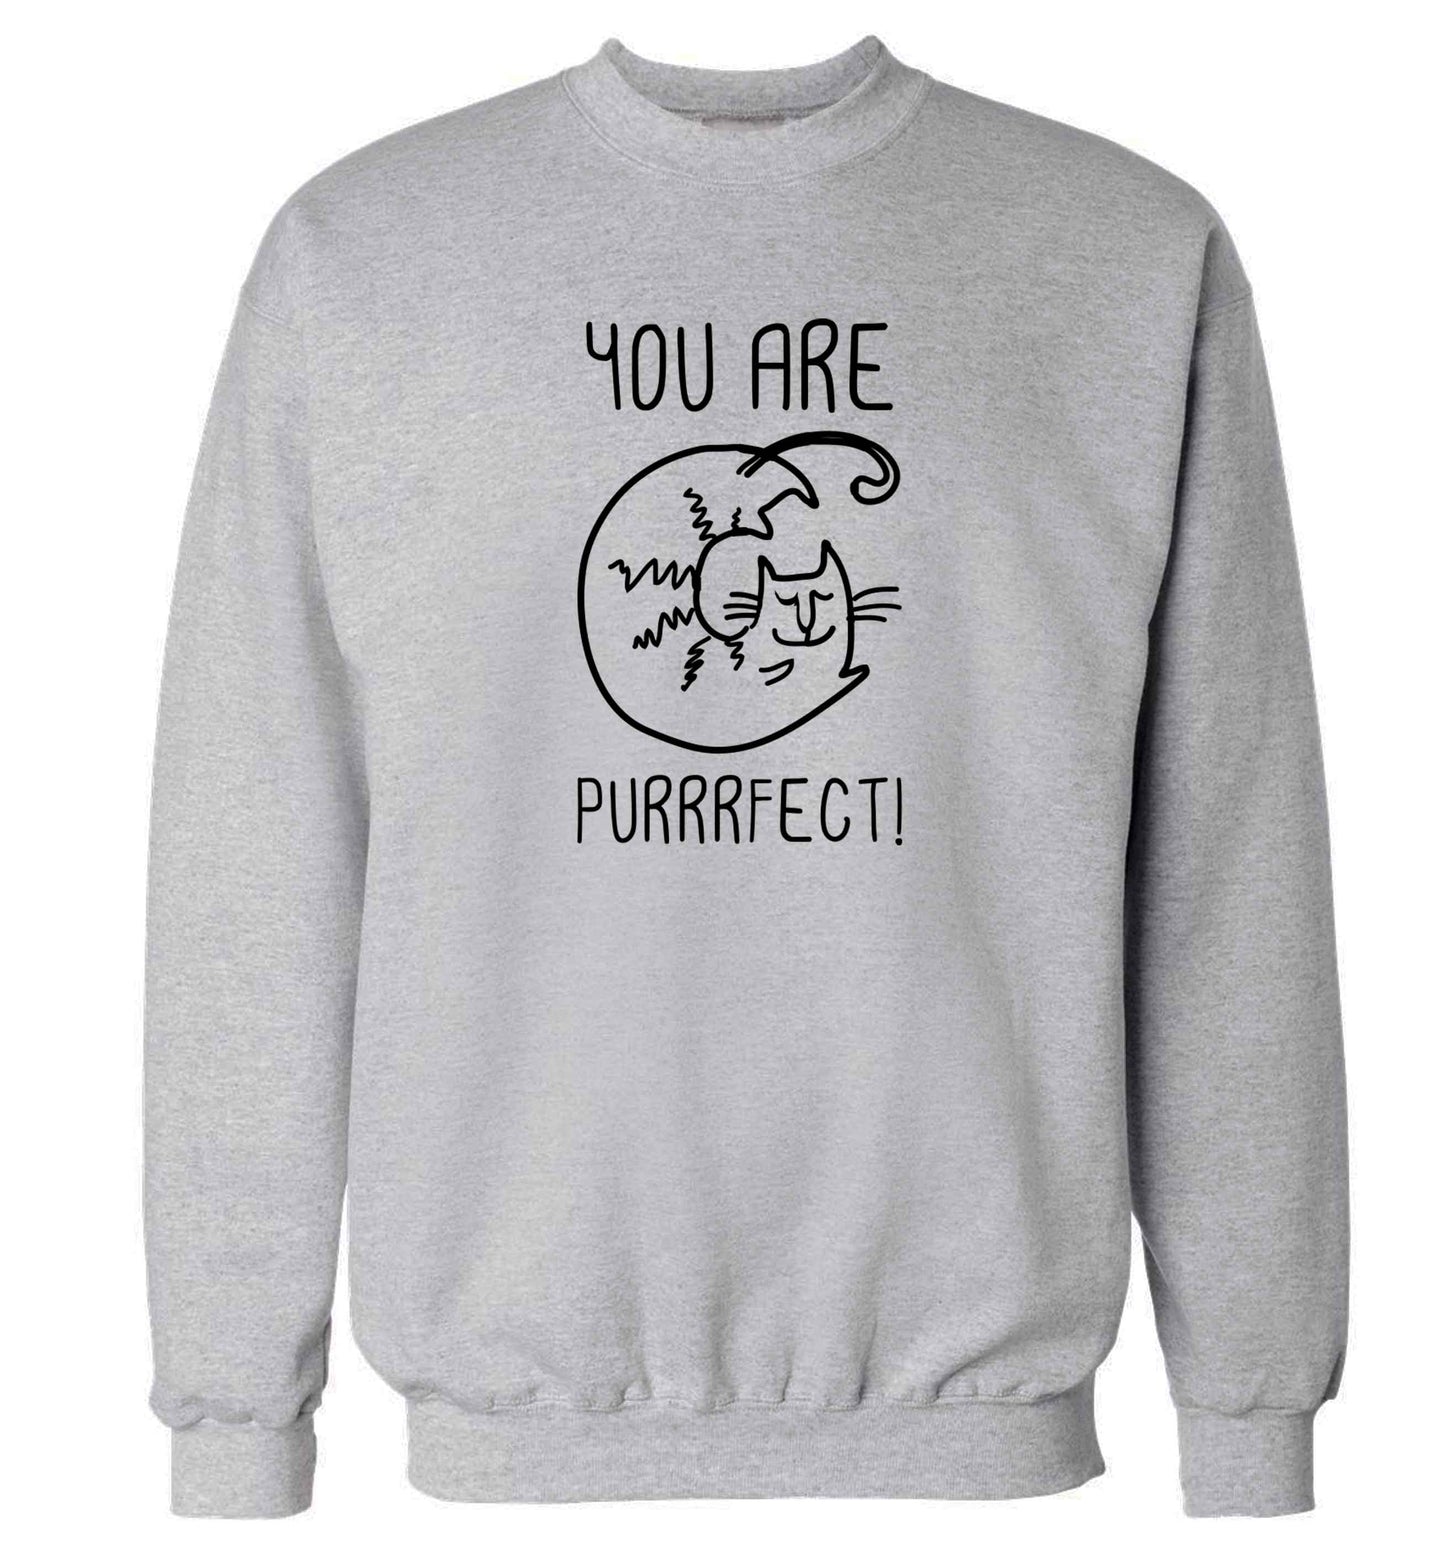 You are purrfect adult's unisex grey sweater 2XL